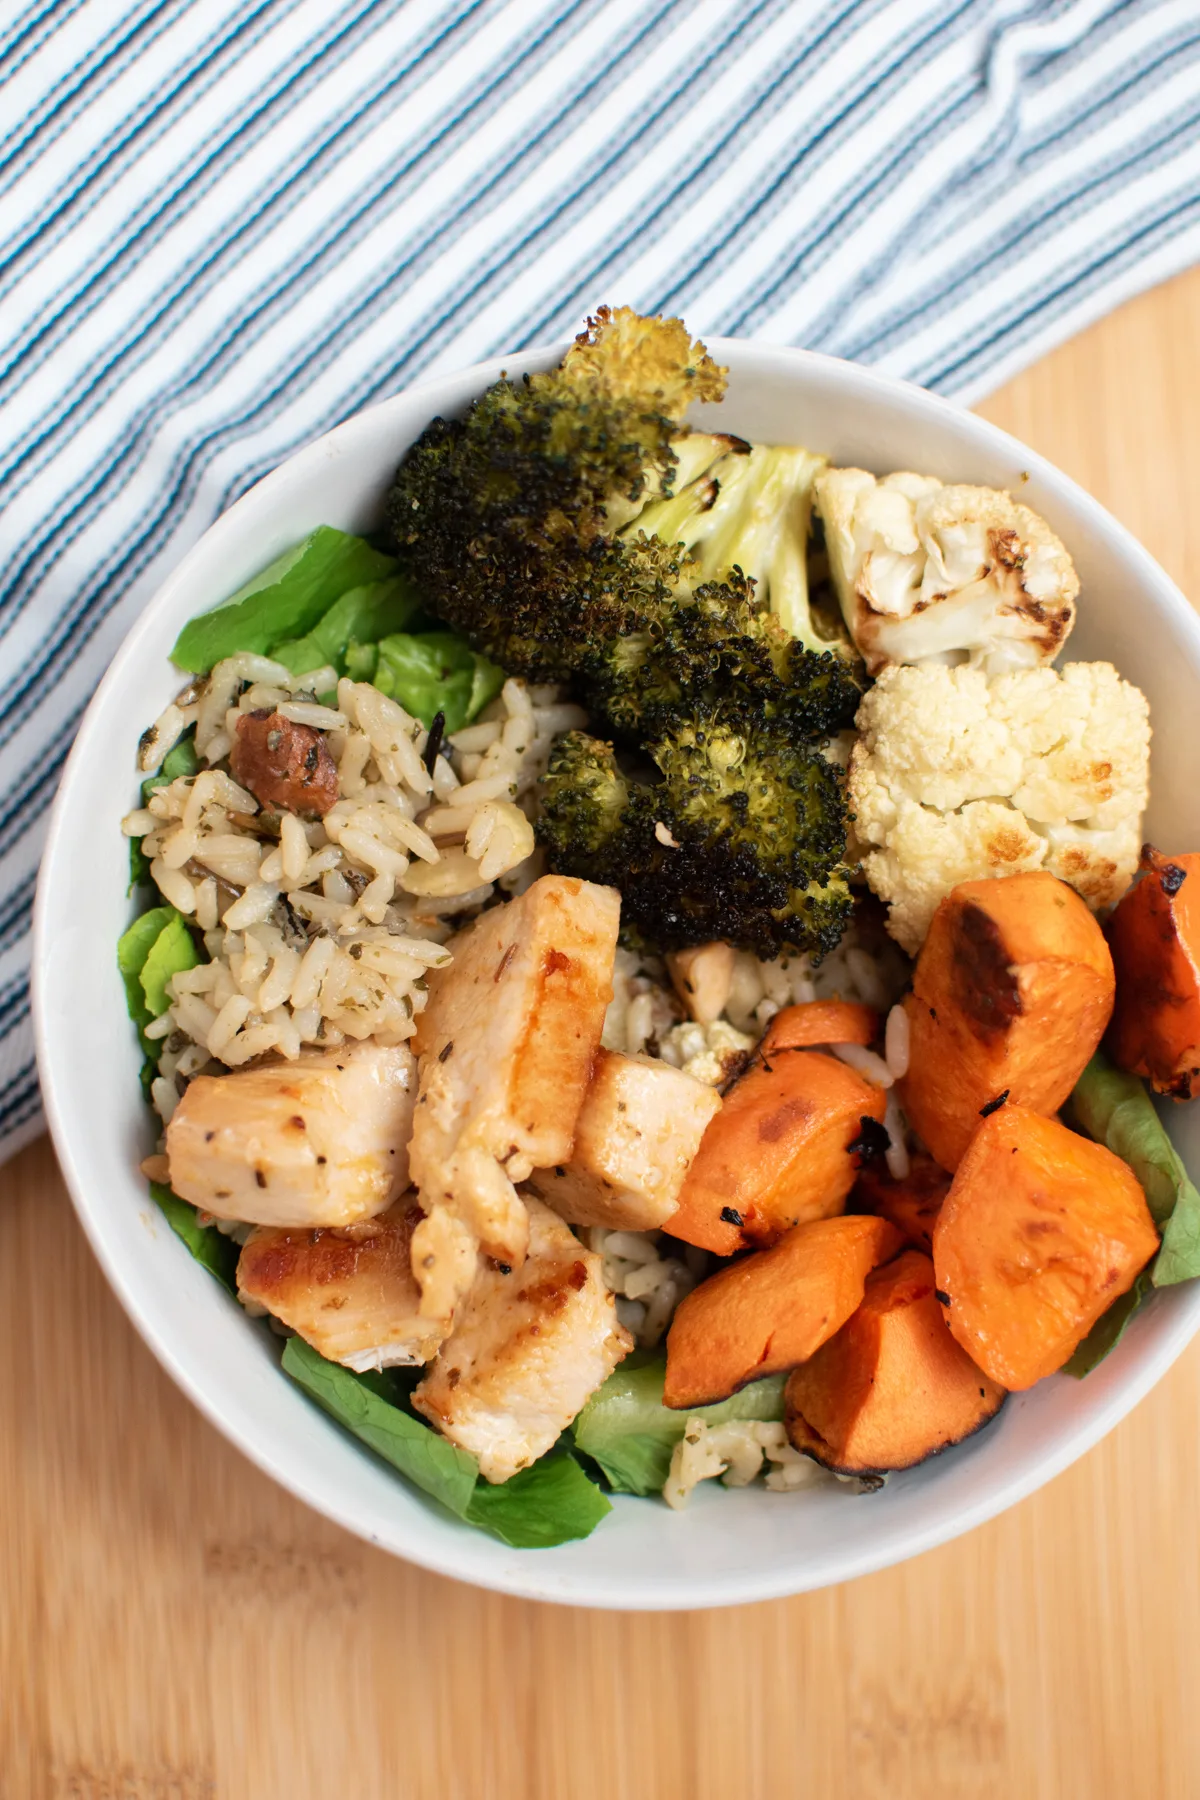 A chicken power bowl on a cutting board topped with sweet potatoes, lettuce and broccoli.